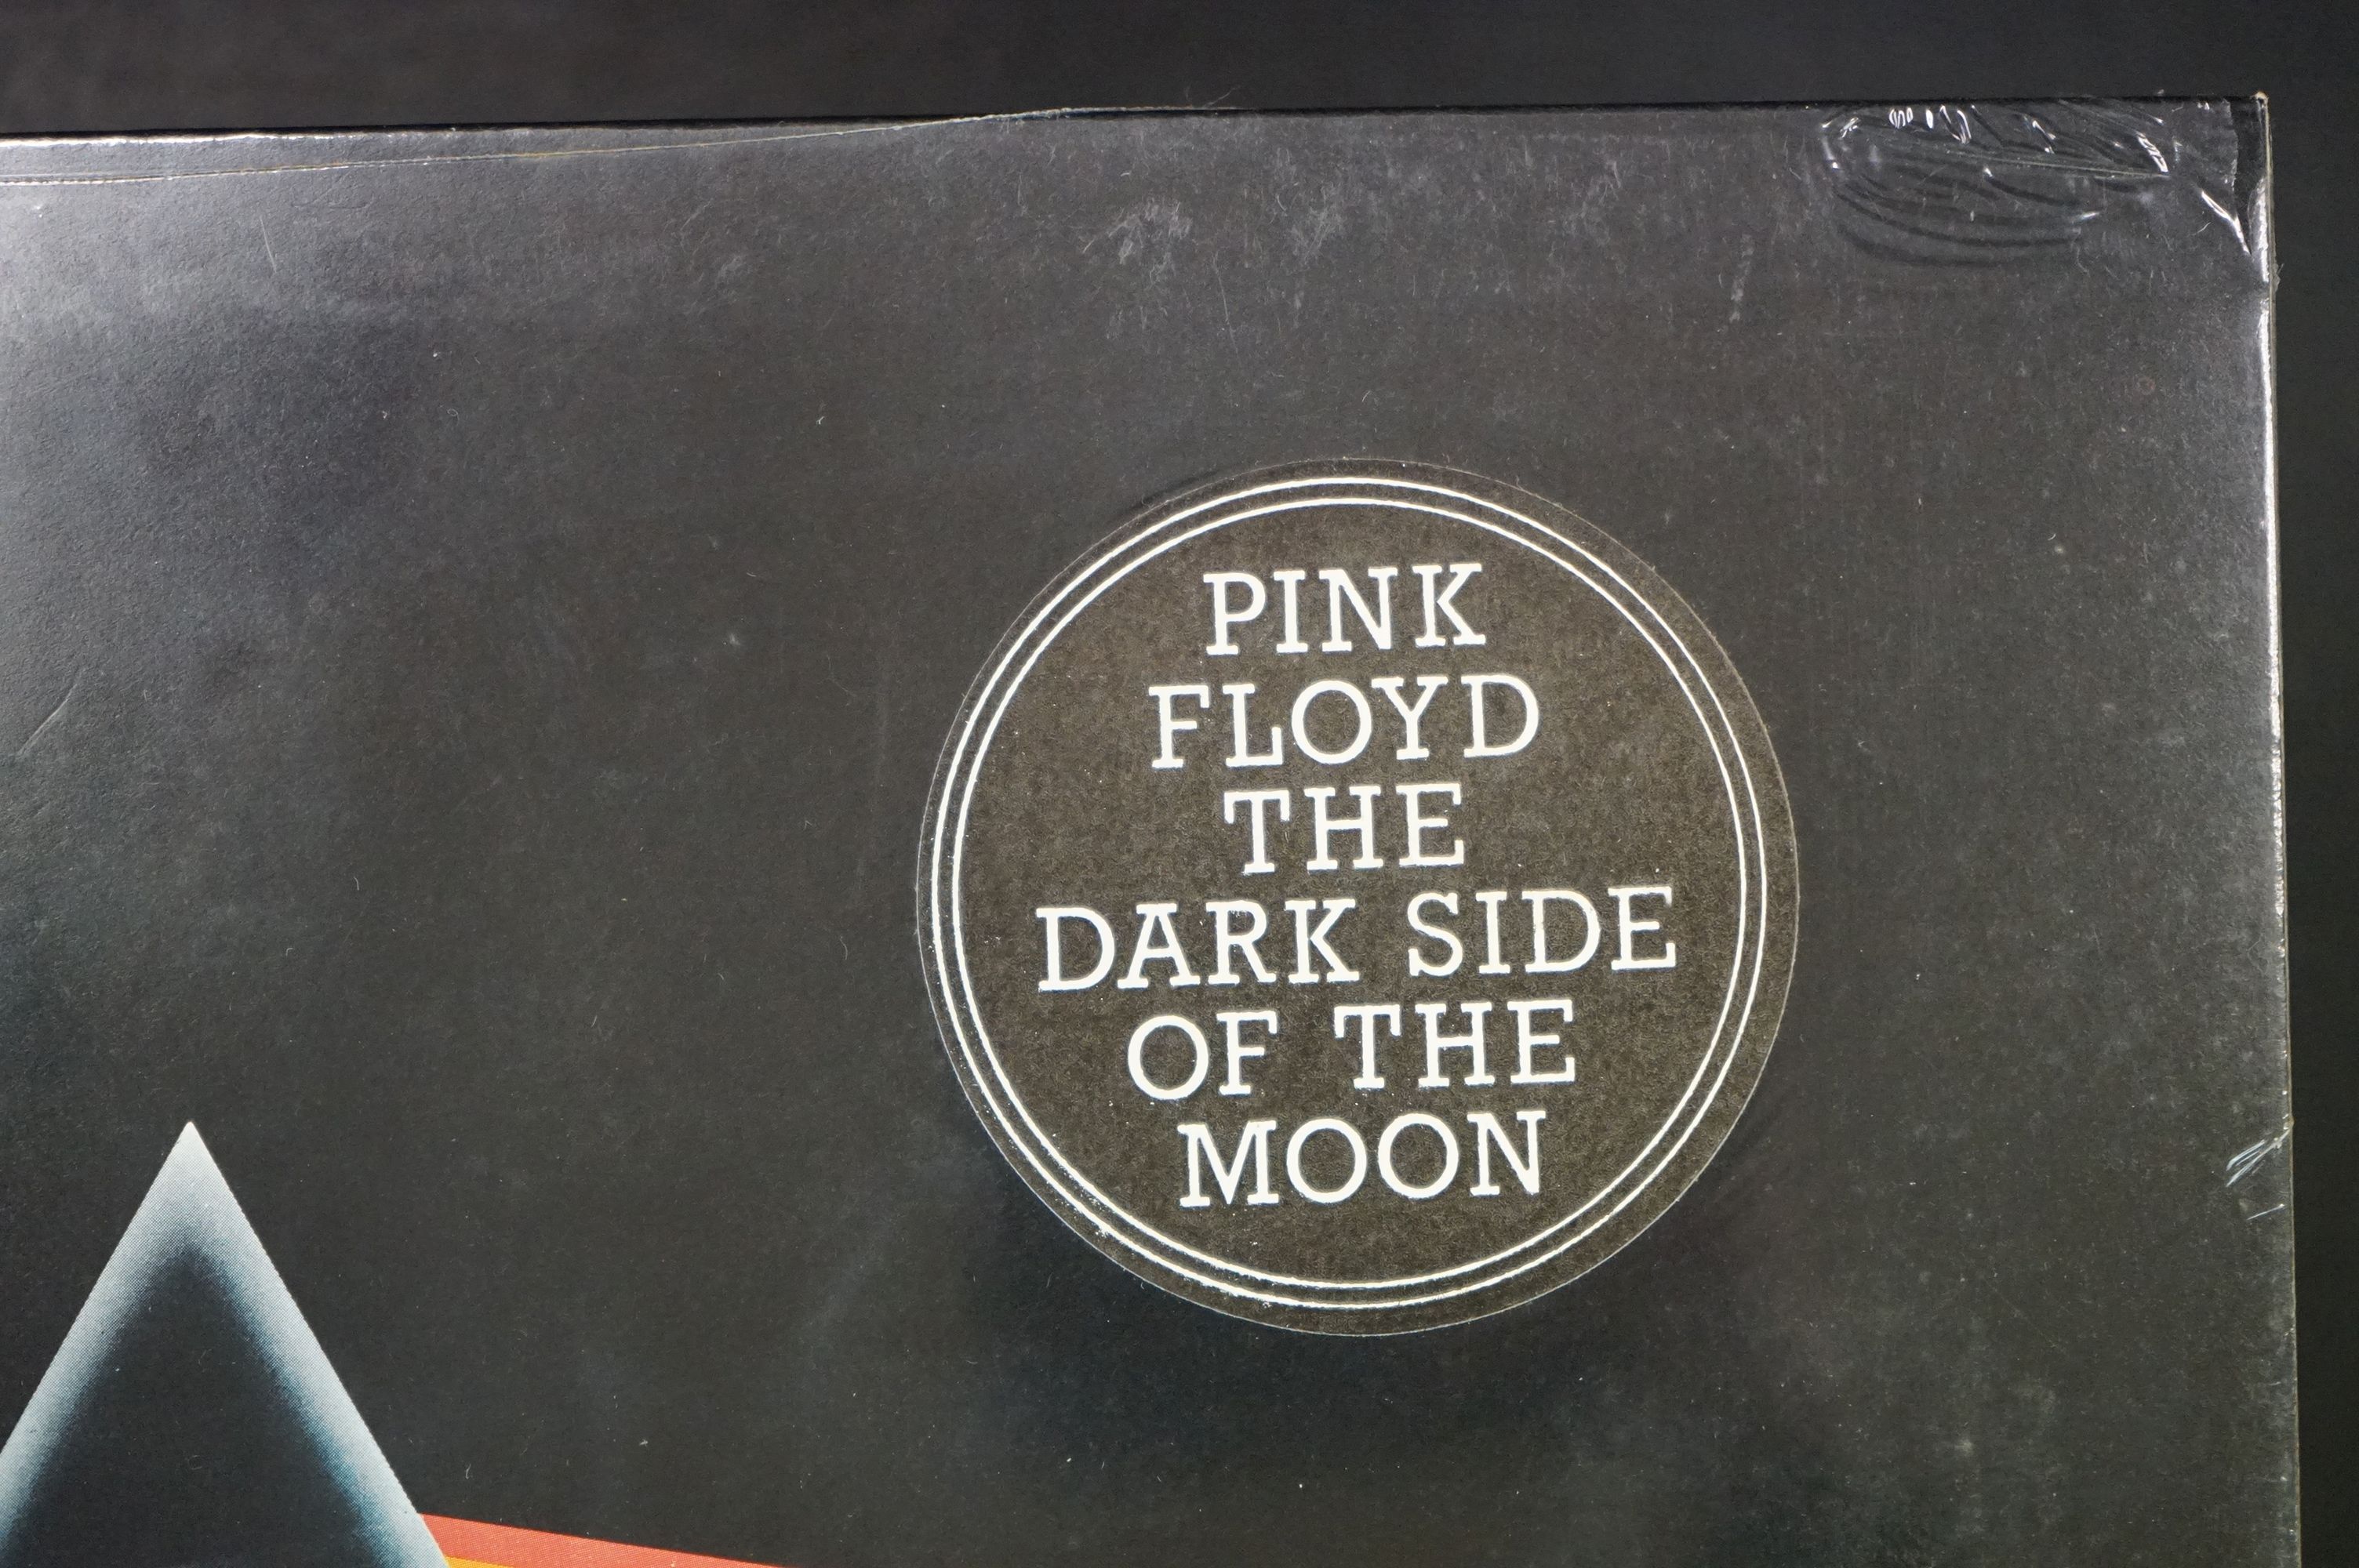 Vinyl - Pink Floyd Dark Side Of The Moon on Harvest SHVL 804 early press sealed in shrink, with some - Image 5 of 7